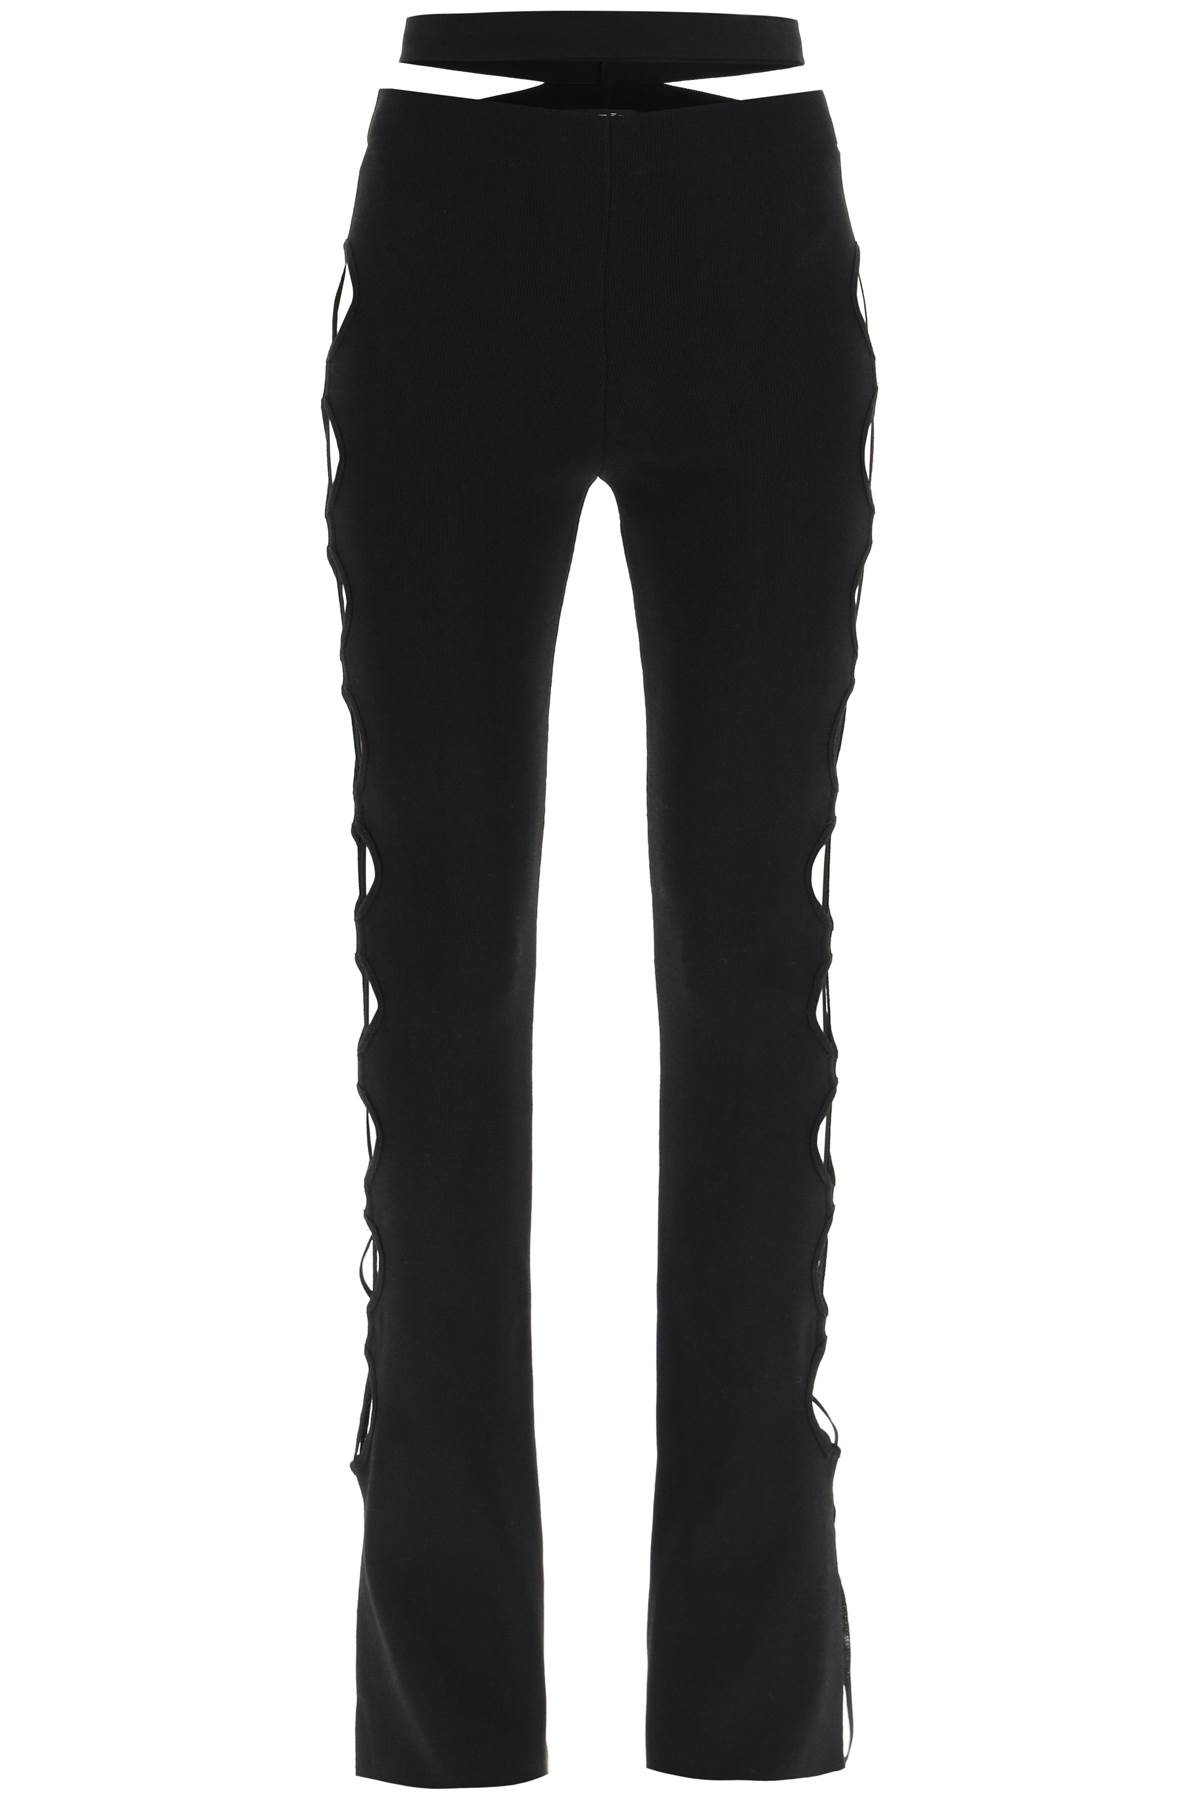 ANDREADAMO Flared Jersey Pants With Cut Outs